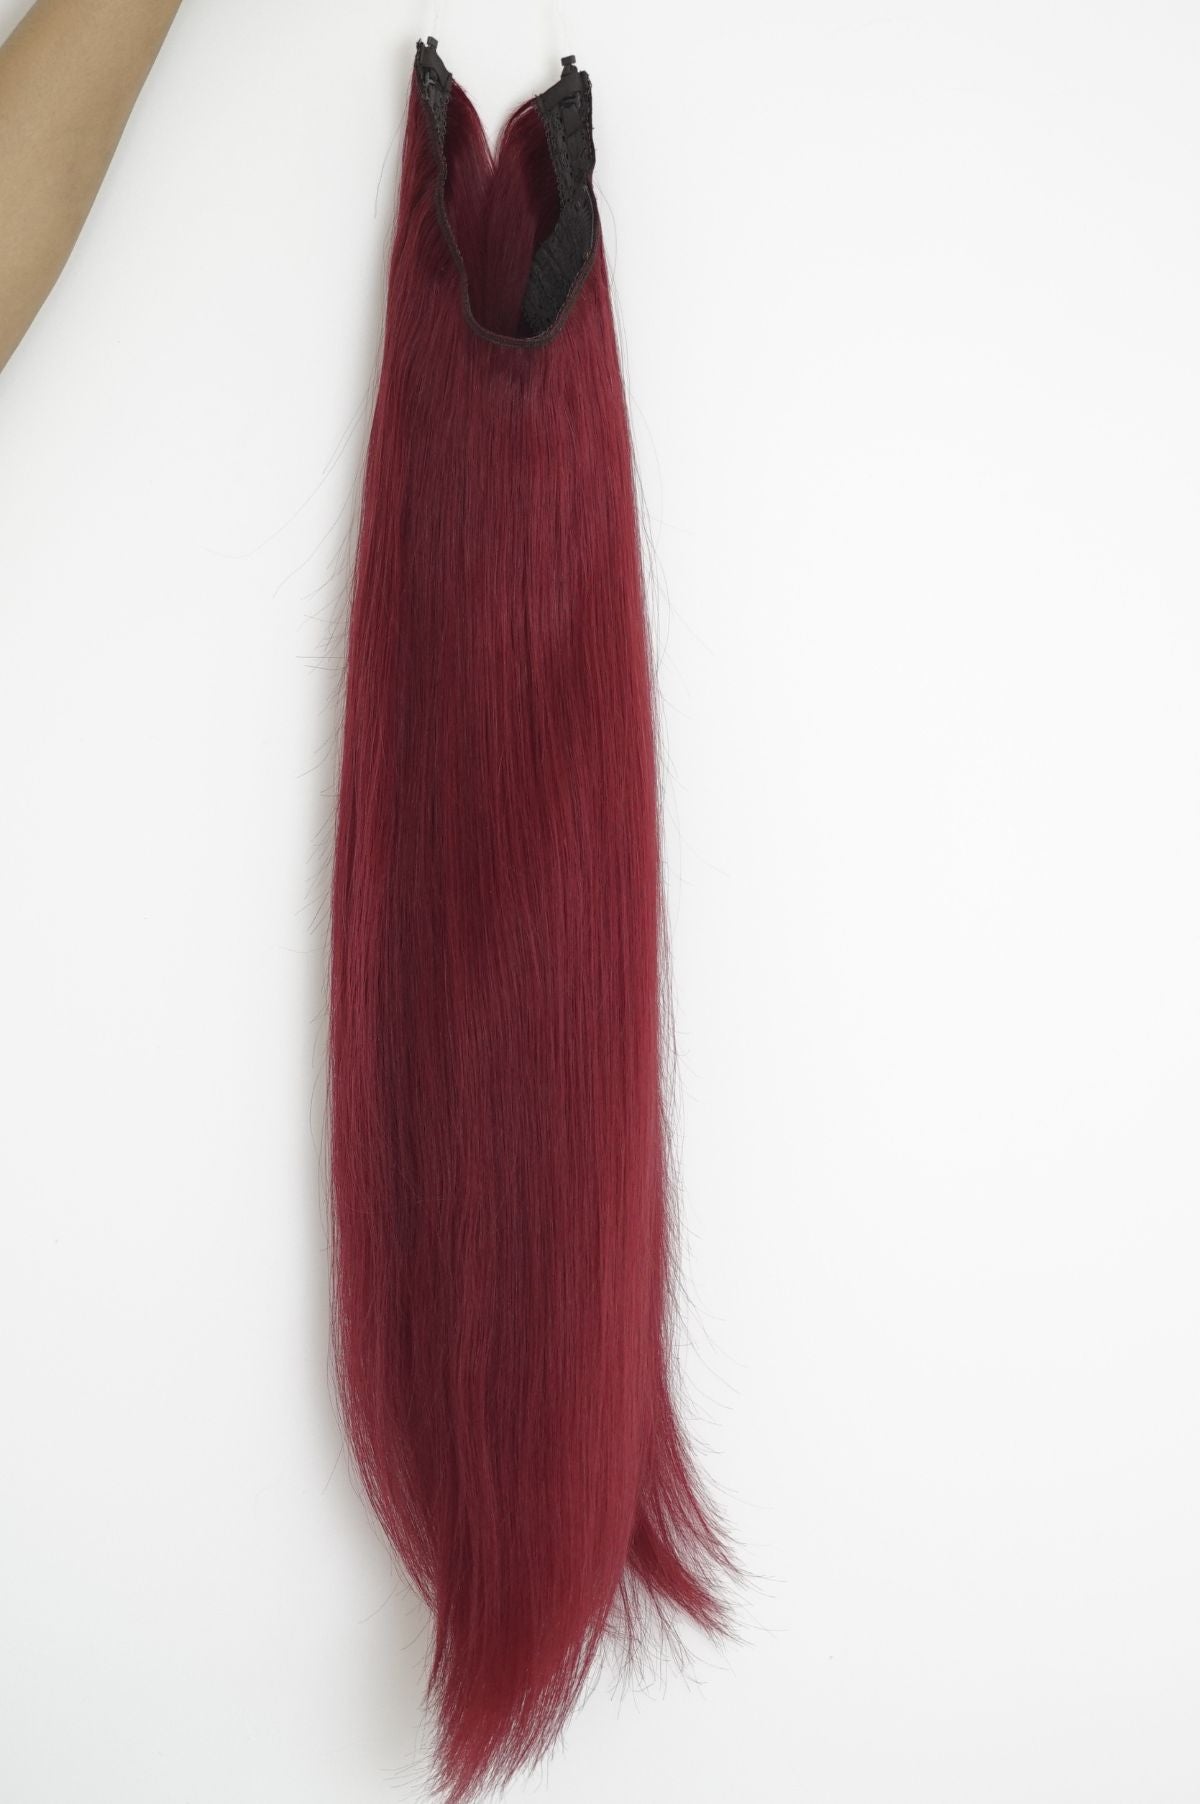 #6R Red Chestnut Brown Classic Halo Hair Extensions